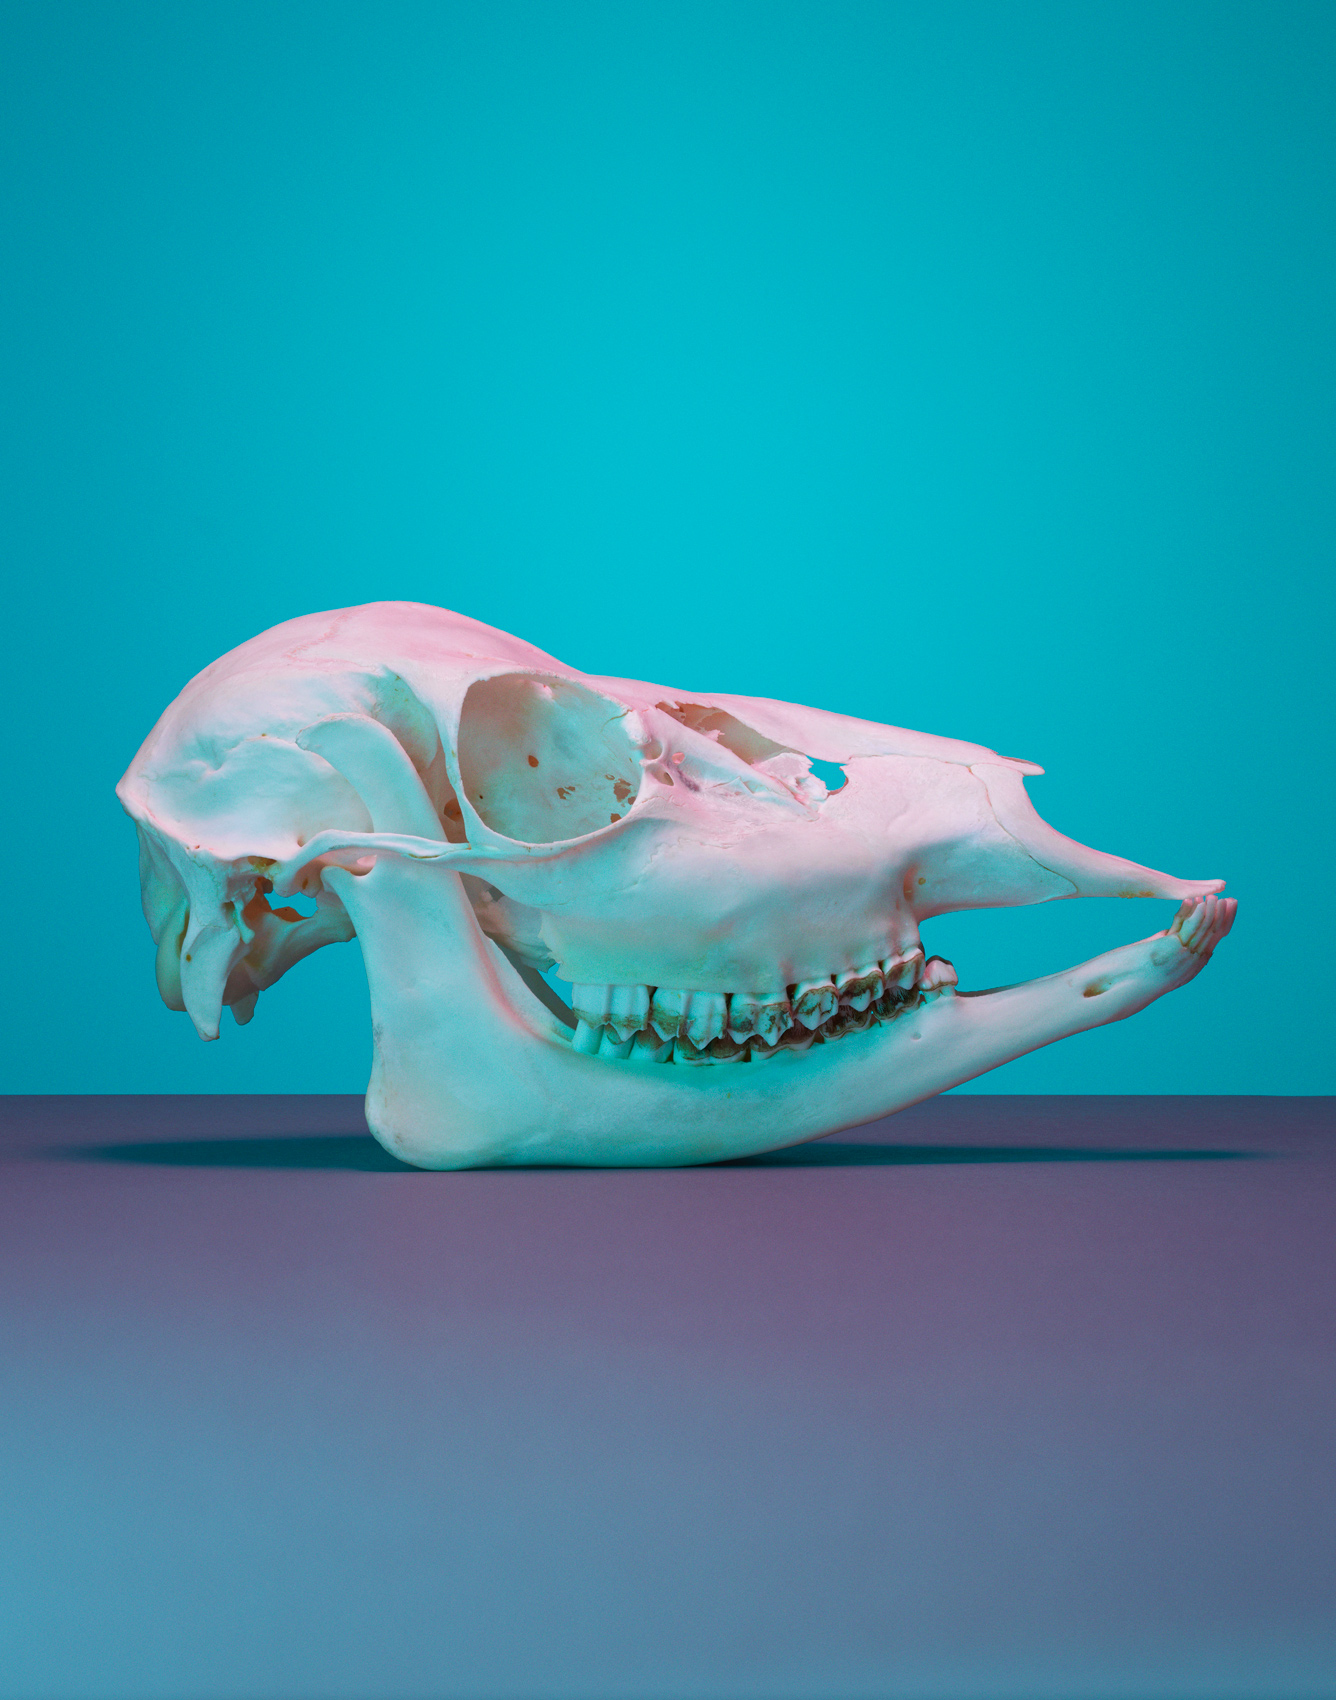 Deer skull by Alexander Kent London based still life and product photographer.